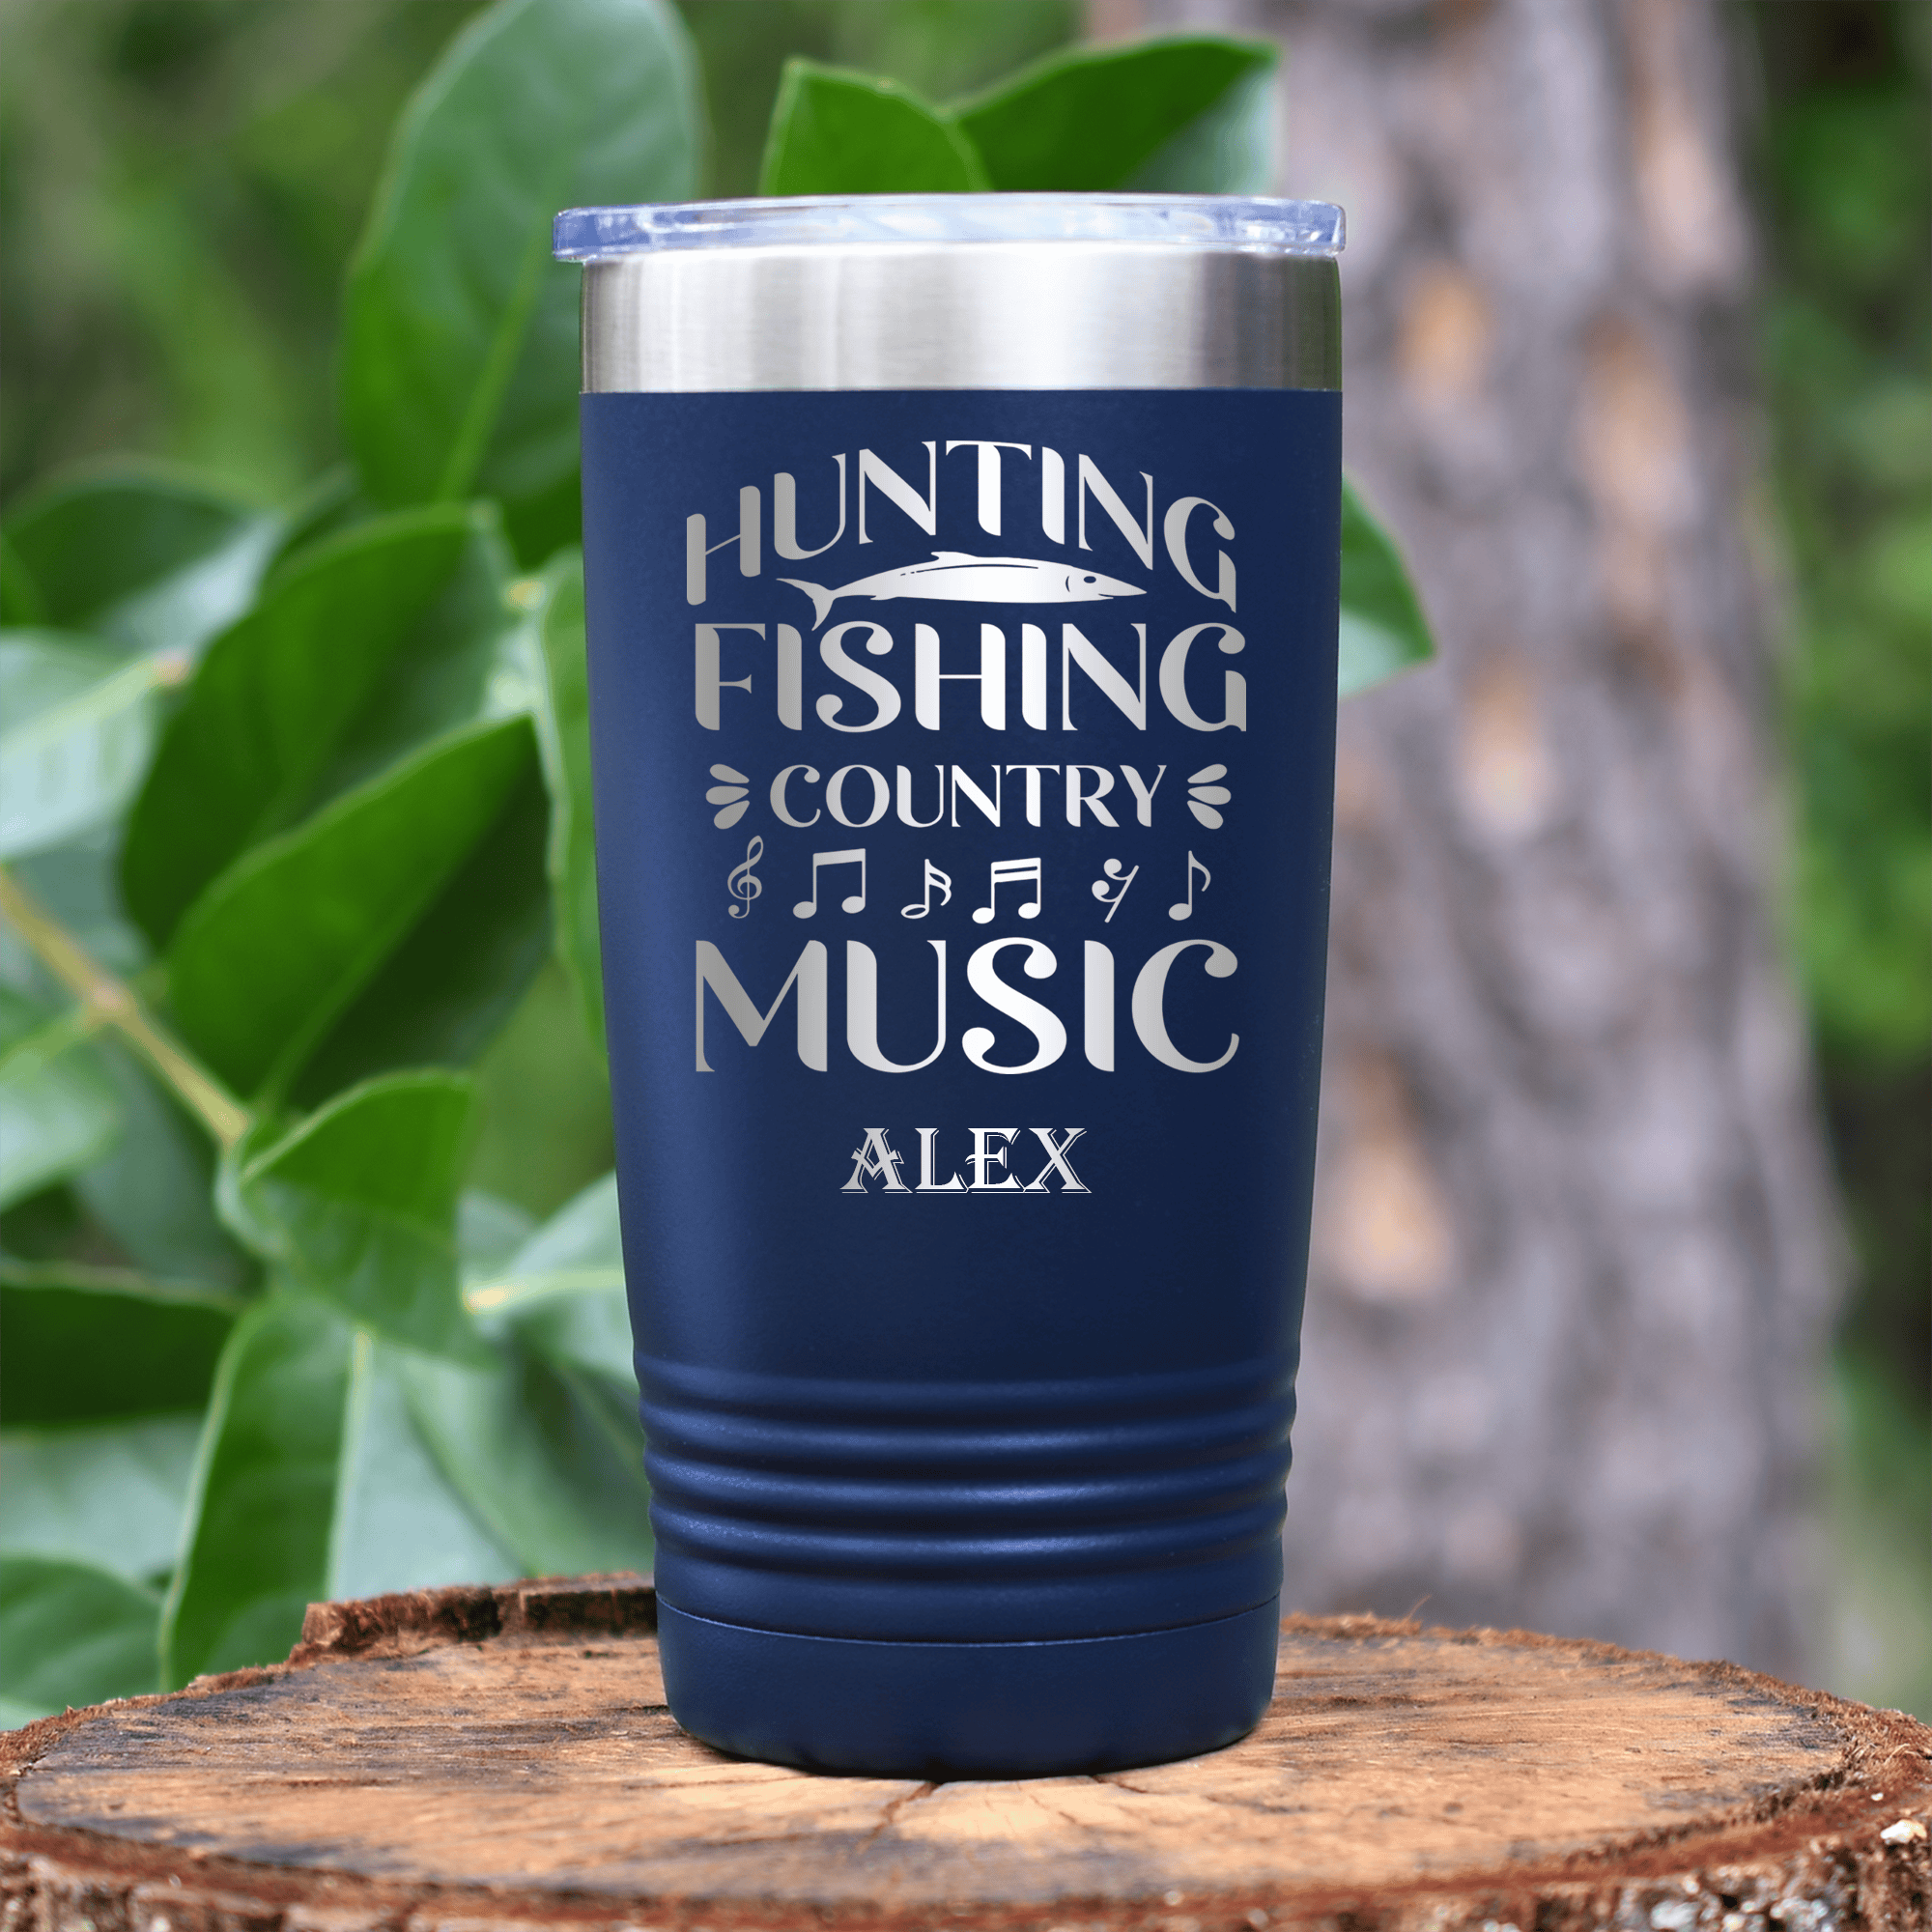 Navy Fishing Tumbler With Hunting Fishing And Country Music Design